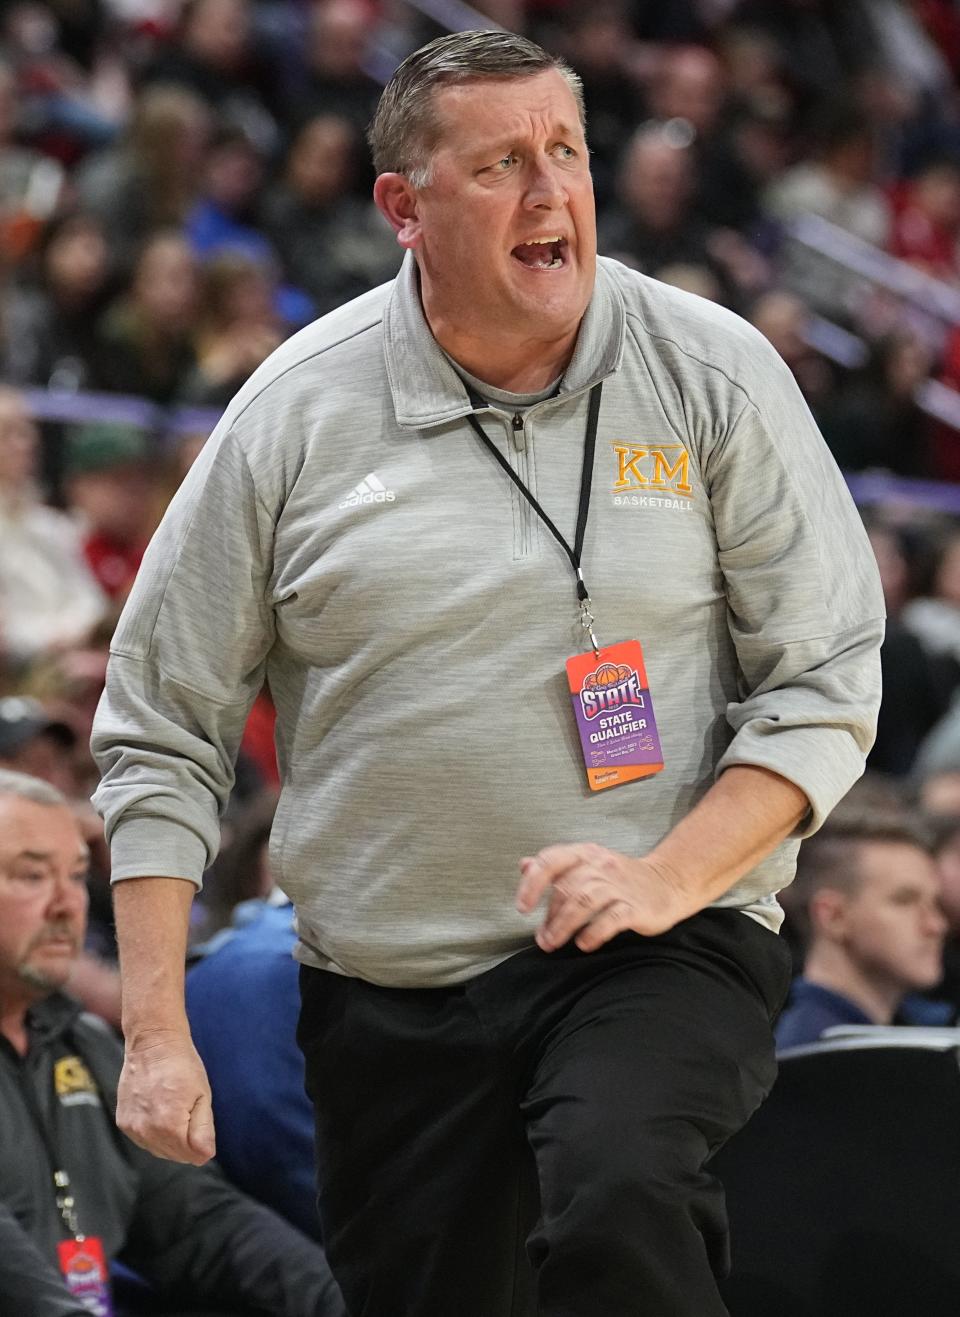 Kettle Moraine girls basketball coach Todd Hansen resigned this week. He received a citation for solicitation of prostitution, according to the Brookfield Police Department.